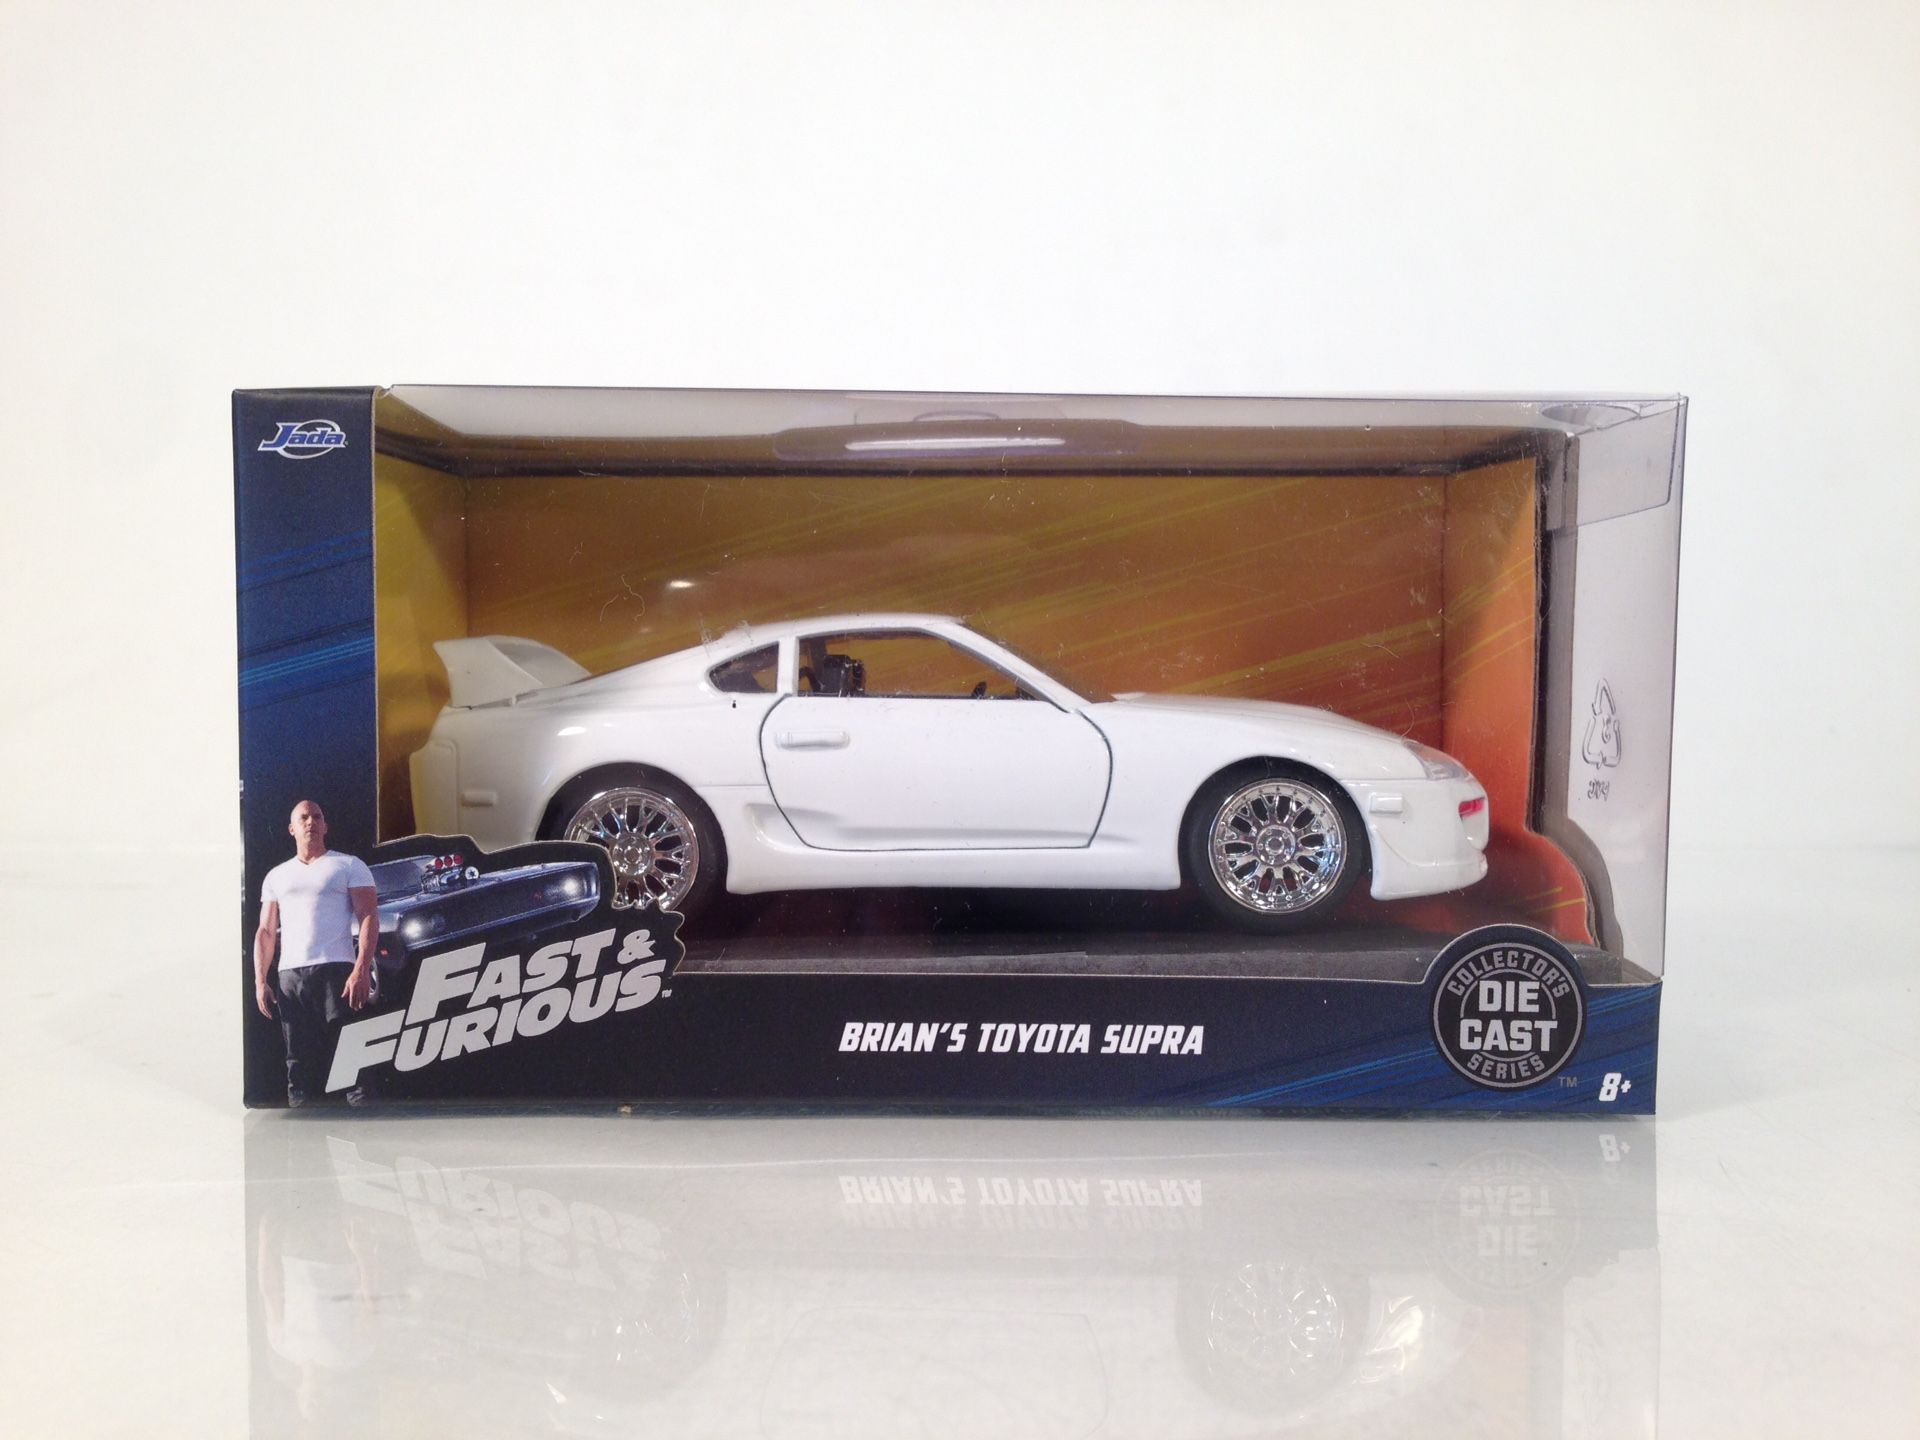 Jada Toys Fast And Furious Die Cast Collectors Series 1:32 Scale Brian's Toyota Supra • Mint